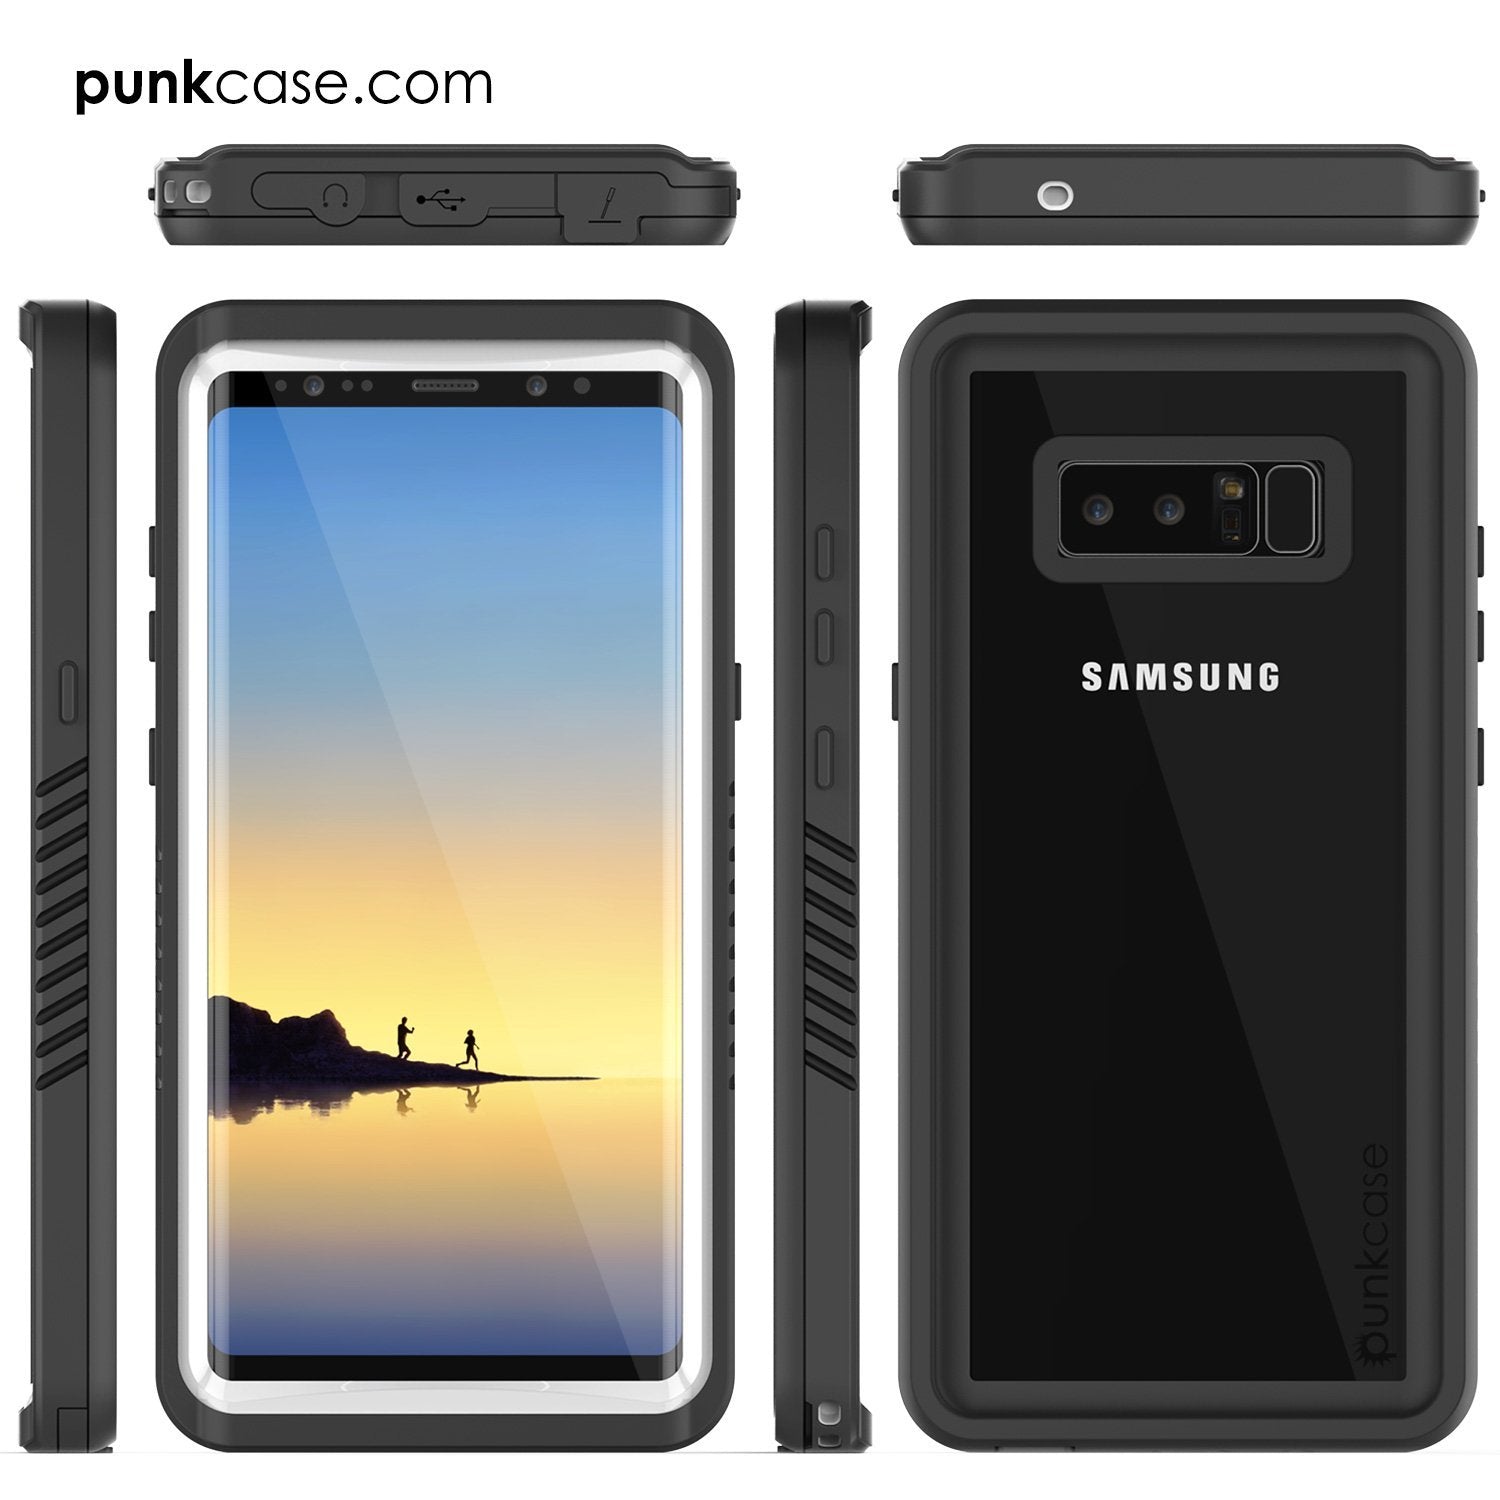 Galaxy Note 8 Case, Punkcase [Extreme Series] [Slim Fit] [IP68 Certified] [Shockproof] Armor Cover W/ Built In Screen Protector [White]